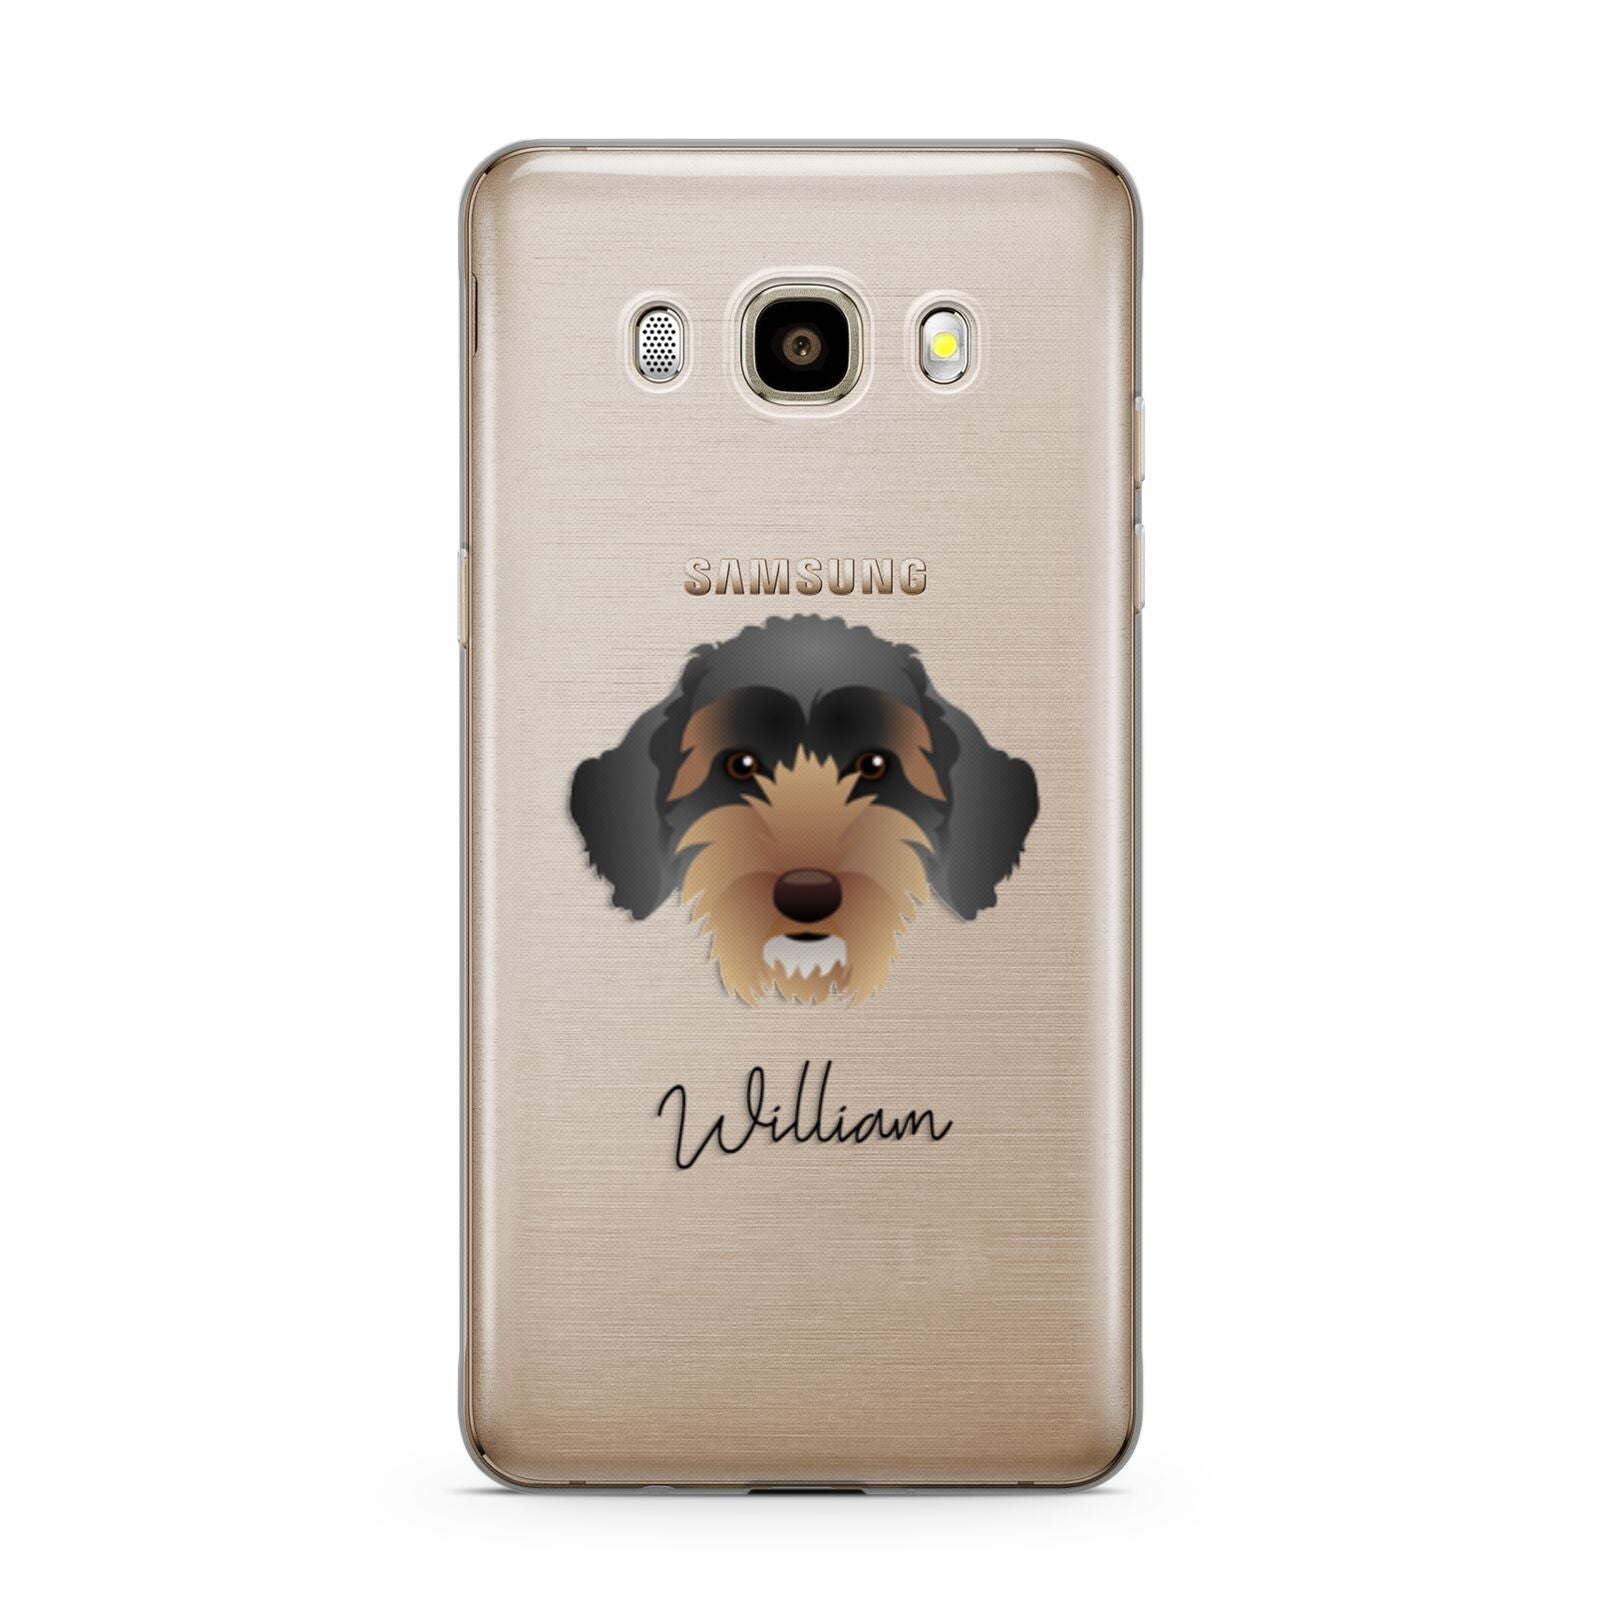 Sproodle Personalised Samsung Galaxy J7 2016 Case on gold phone